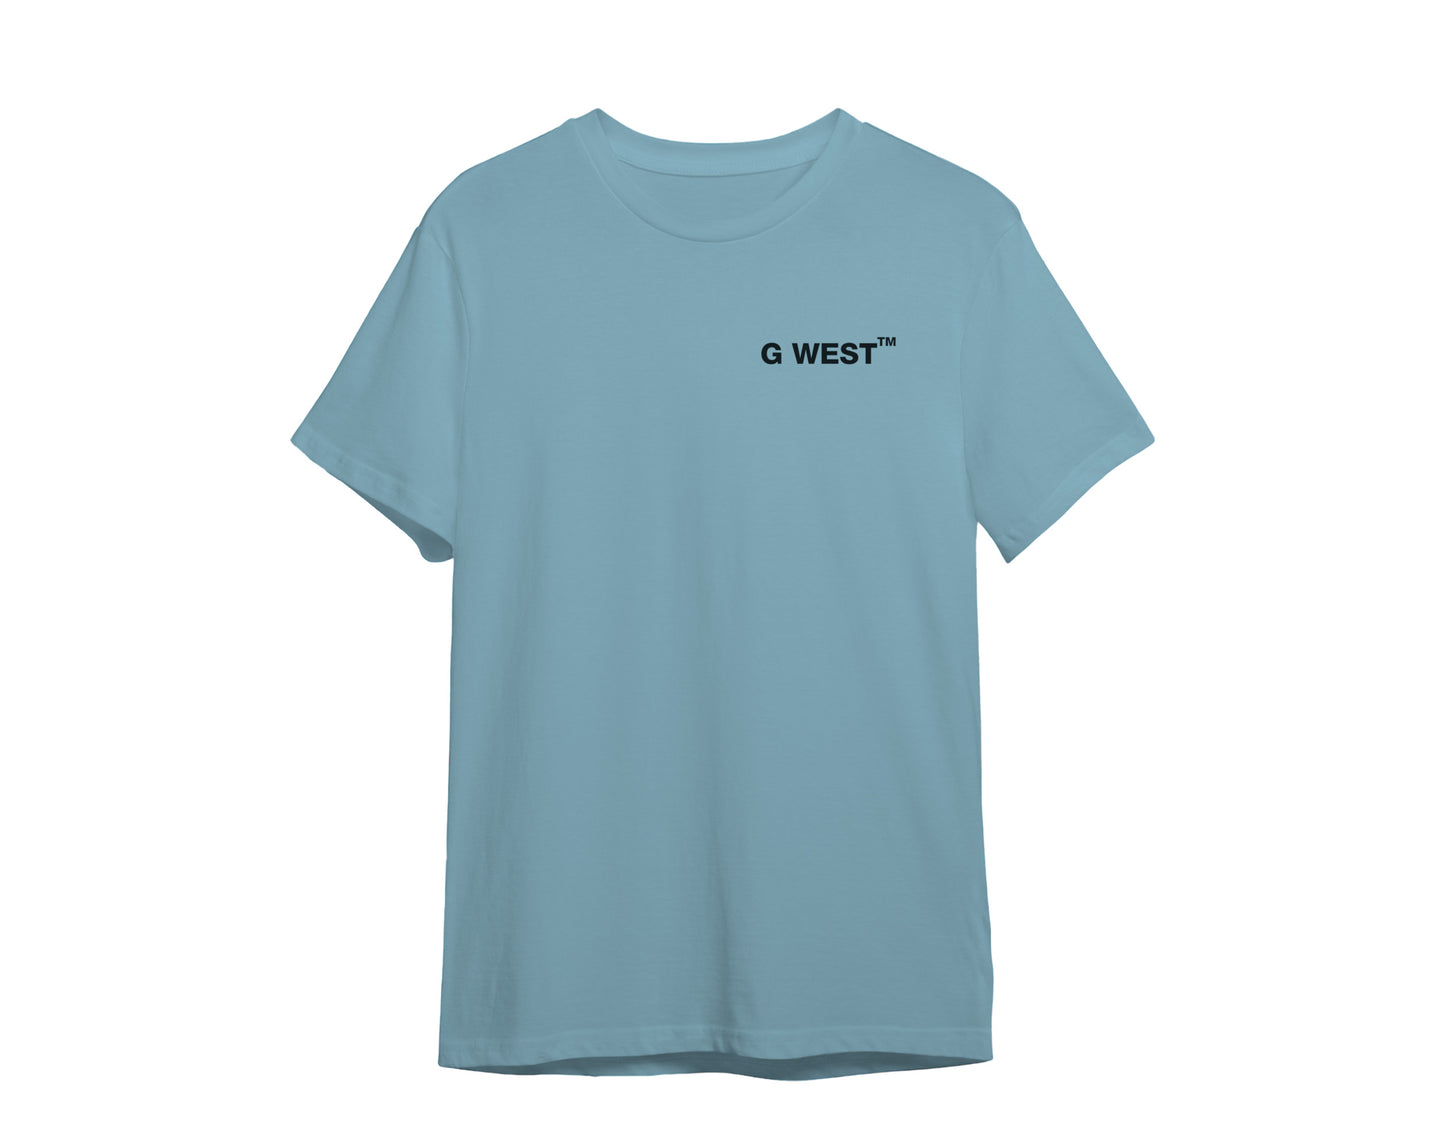 G West Printed Ghost Graphic Crew Neck Men's T-Shirt